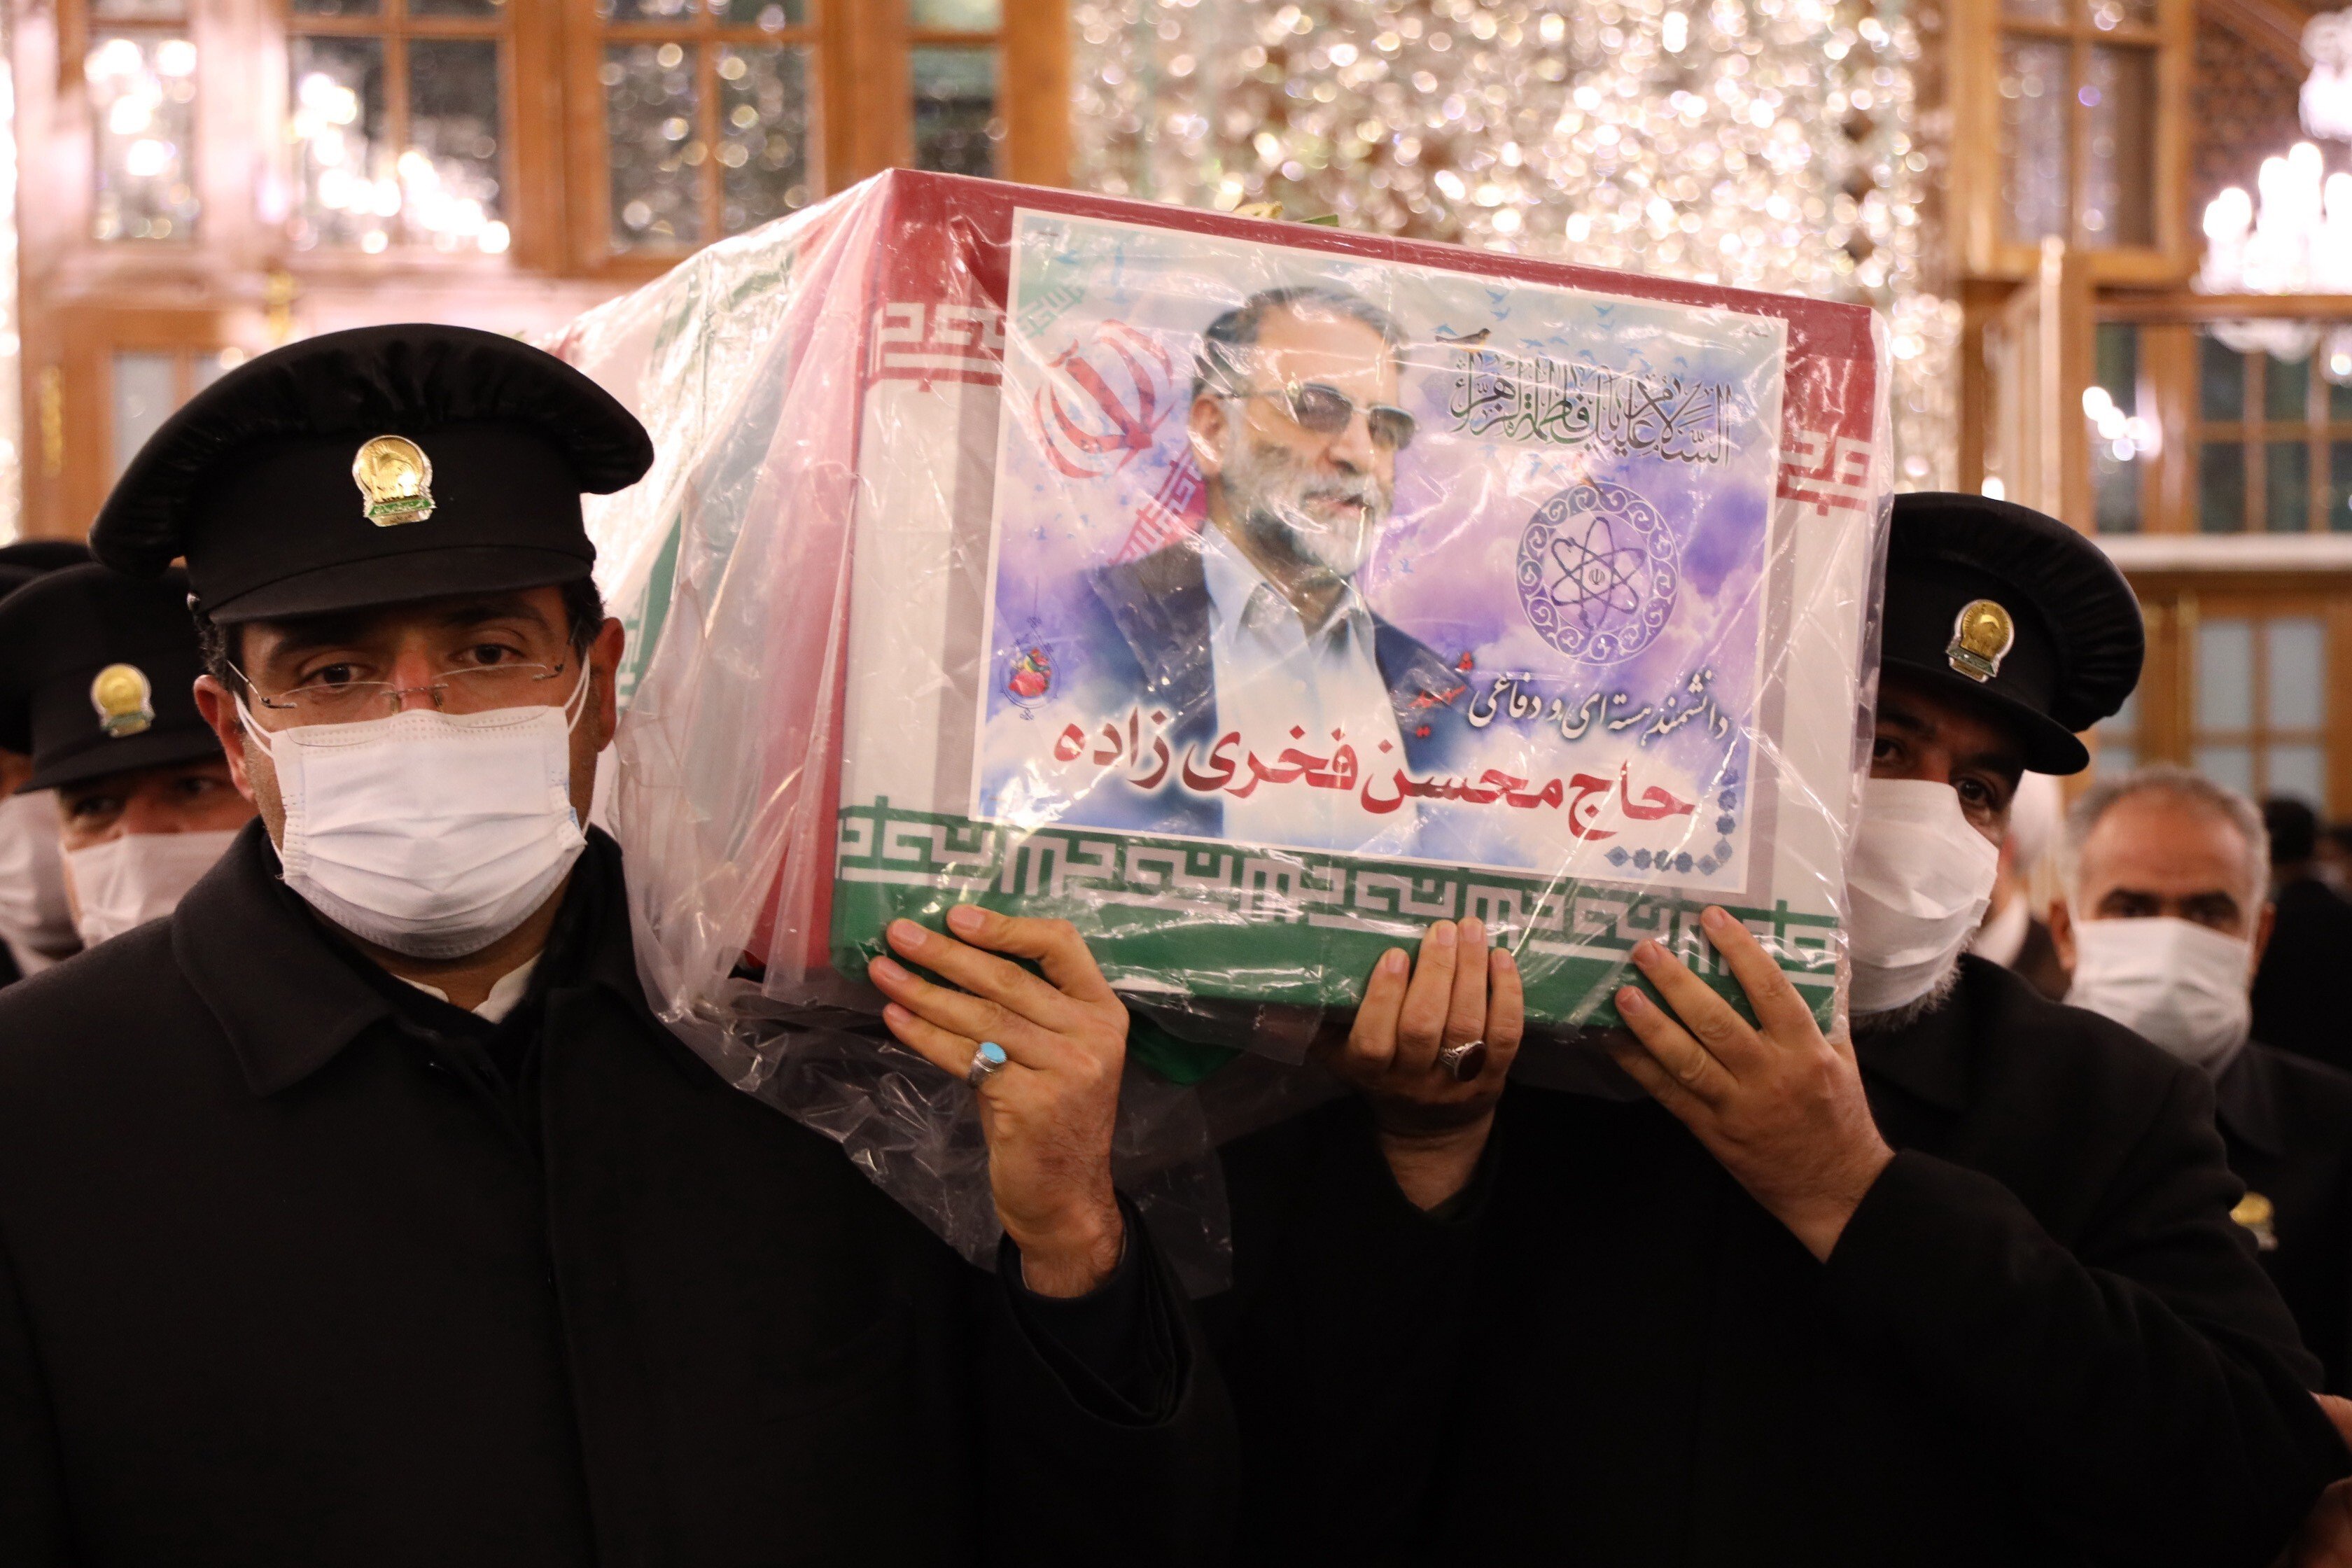 Pallbearers carry the coffin of slain Iranian nuclear scientist Mohsen Fakhrizadeh inside the Shrine of Imam Reza during a funeral ceremony in the city of Mashhad on Sunday. Photo: EPA